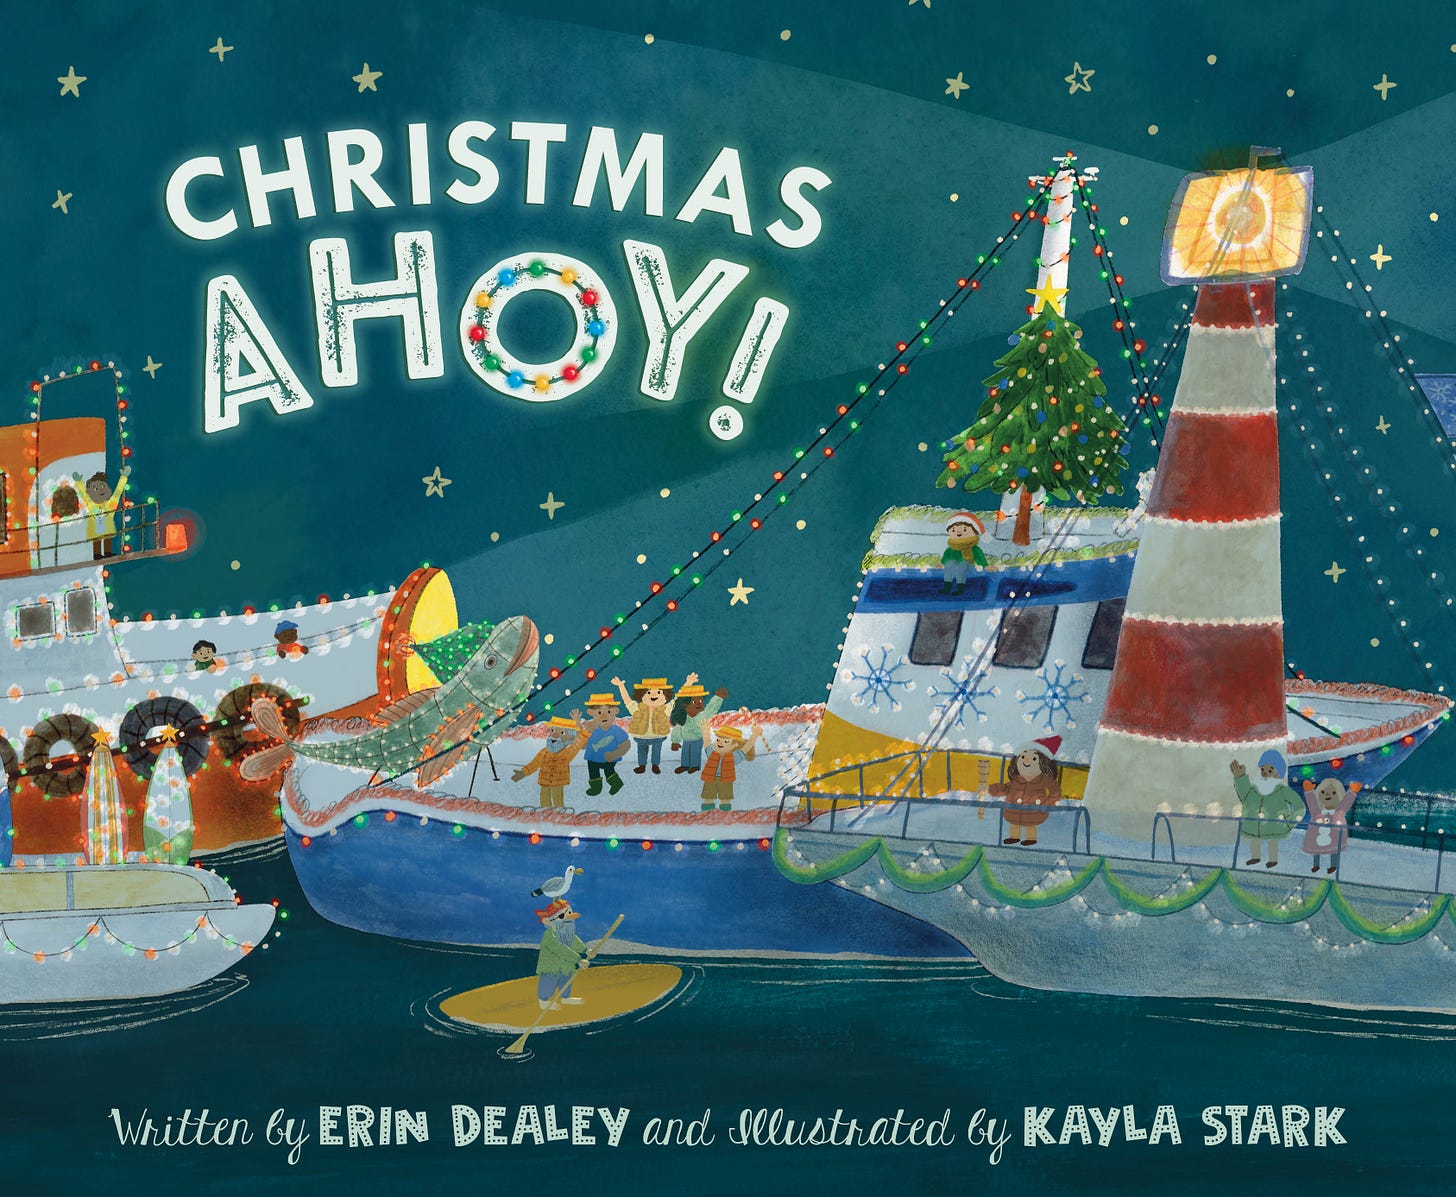 Christmas Ahoy book cover Erin Dealey and Kayla Stark counting boat parade illustration picture book